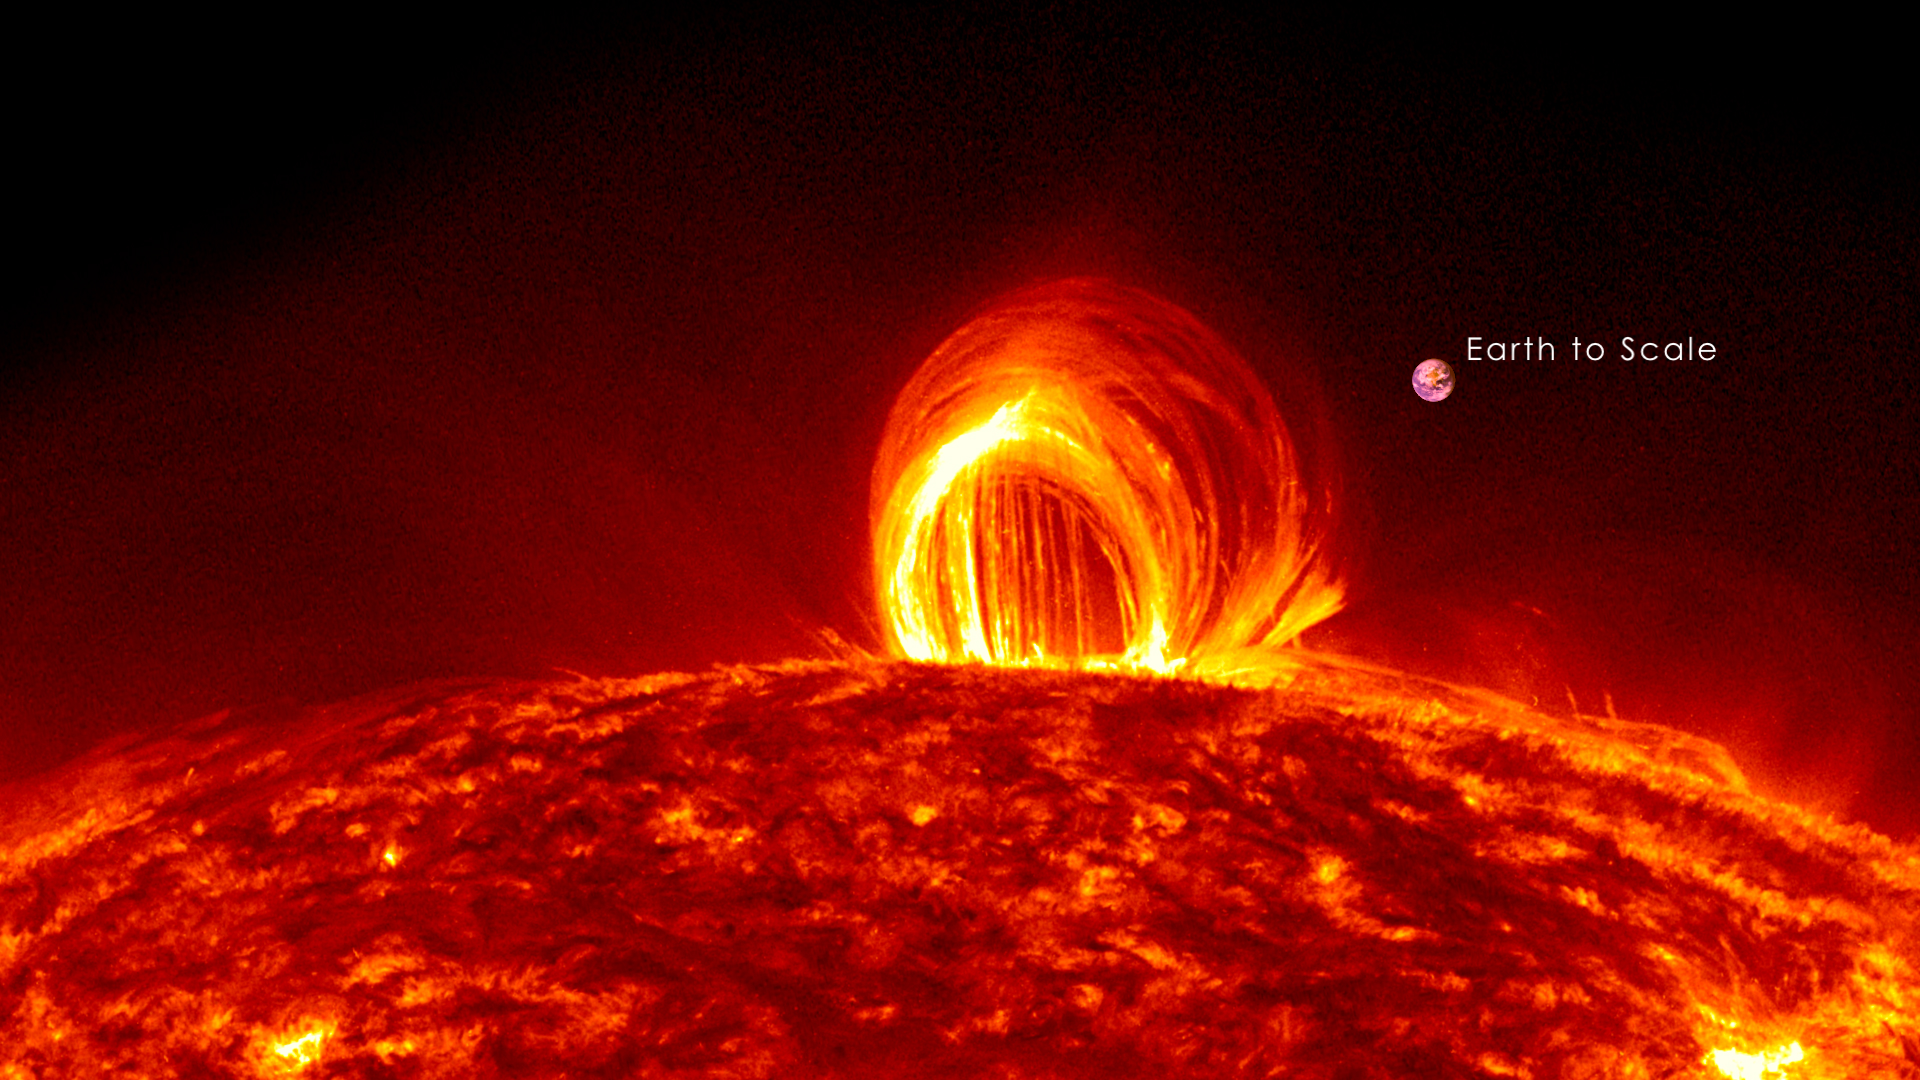 On July 19, 2012, an eruption occurred on the sun that produced a moderately powerful solar flare and a dazzling magnetic display known as coronal rain. Hot plasma in the corona cooled and condensed along strong magnetic fields in the region. Magnetic fields, are invisible, but the charged plasma is forced to move along the lines, showing up brightly in the extreme ultraviolet wavelength of 304 angstroms, and outlining the fields as it slowly falls back to the solar surface.Music: "Thunderbolt" by Lars Leonhard, courtesy of artist.For complete transcript, click here.